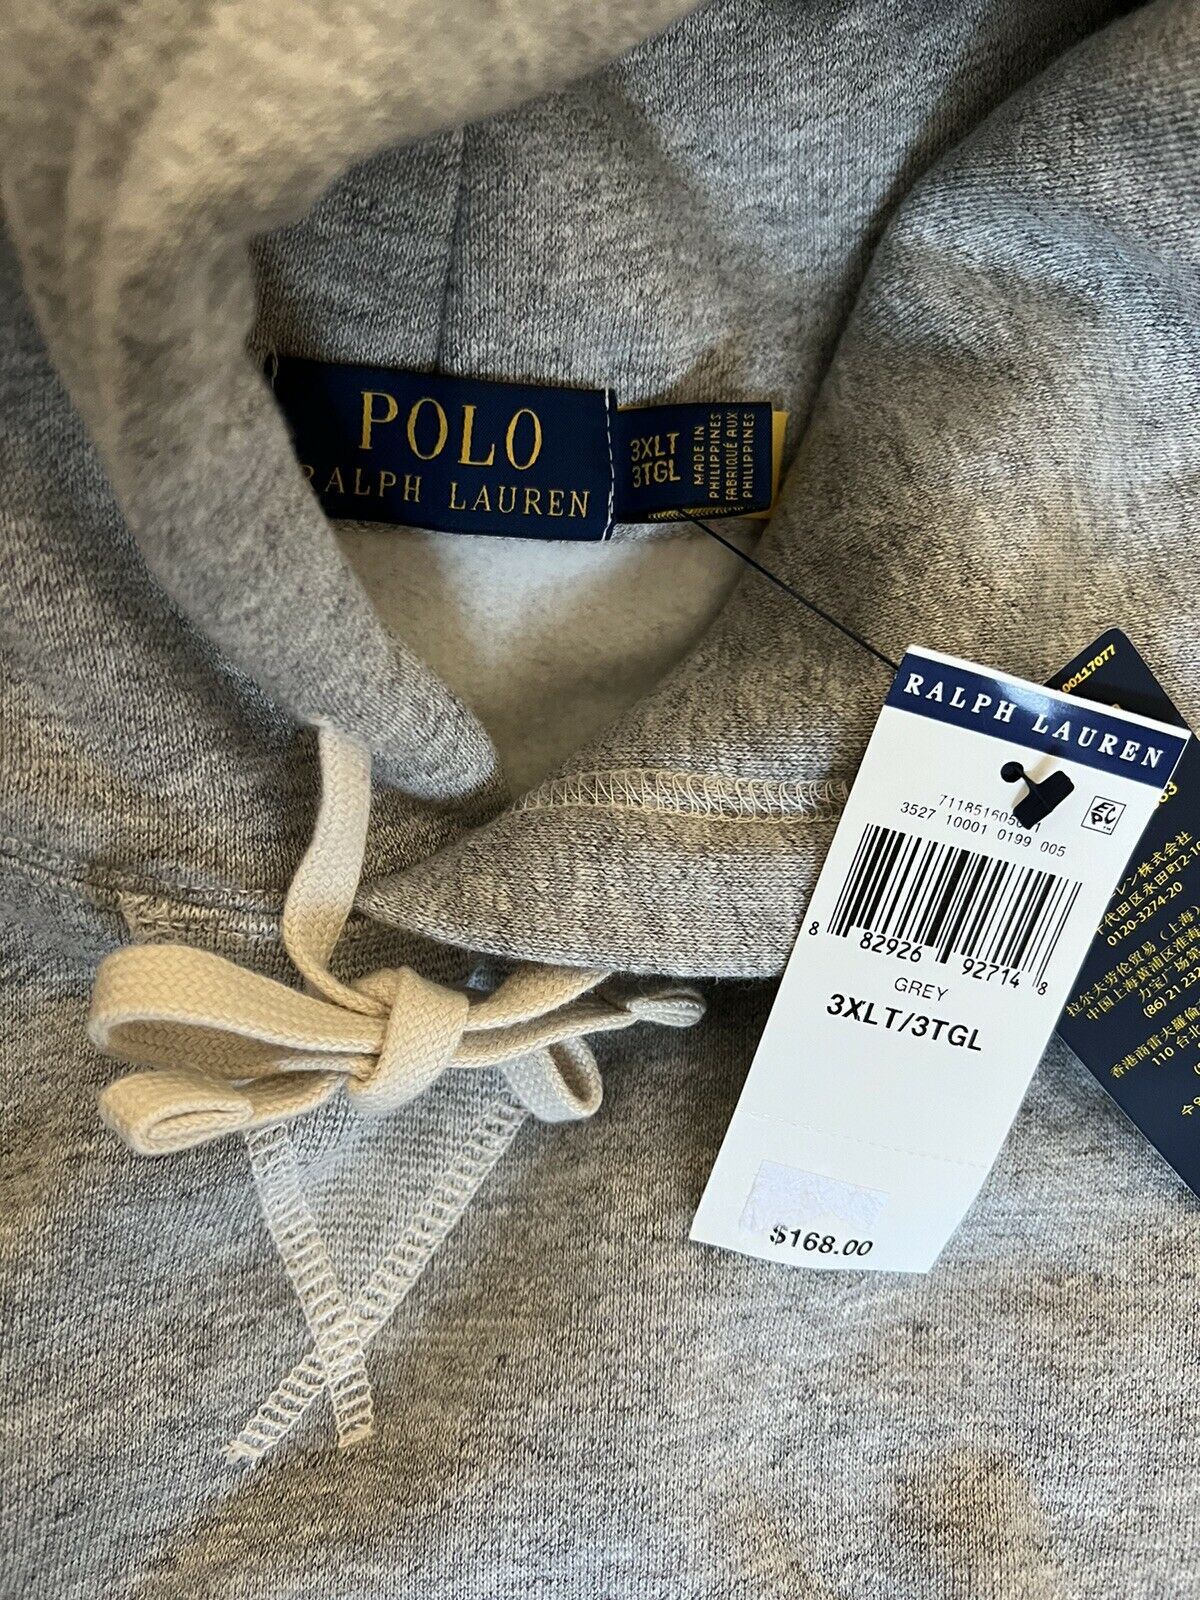 NWT $168 Polo Ralph Lauren Tiger Gray Sweater with Hoodie 3XLT